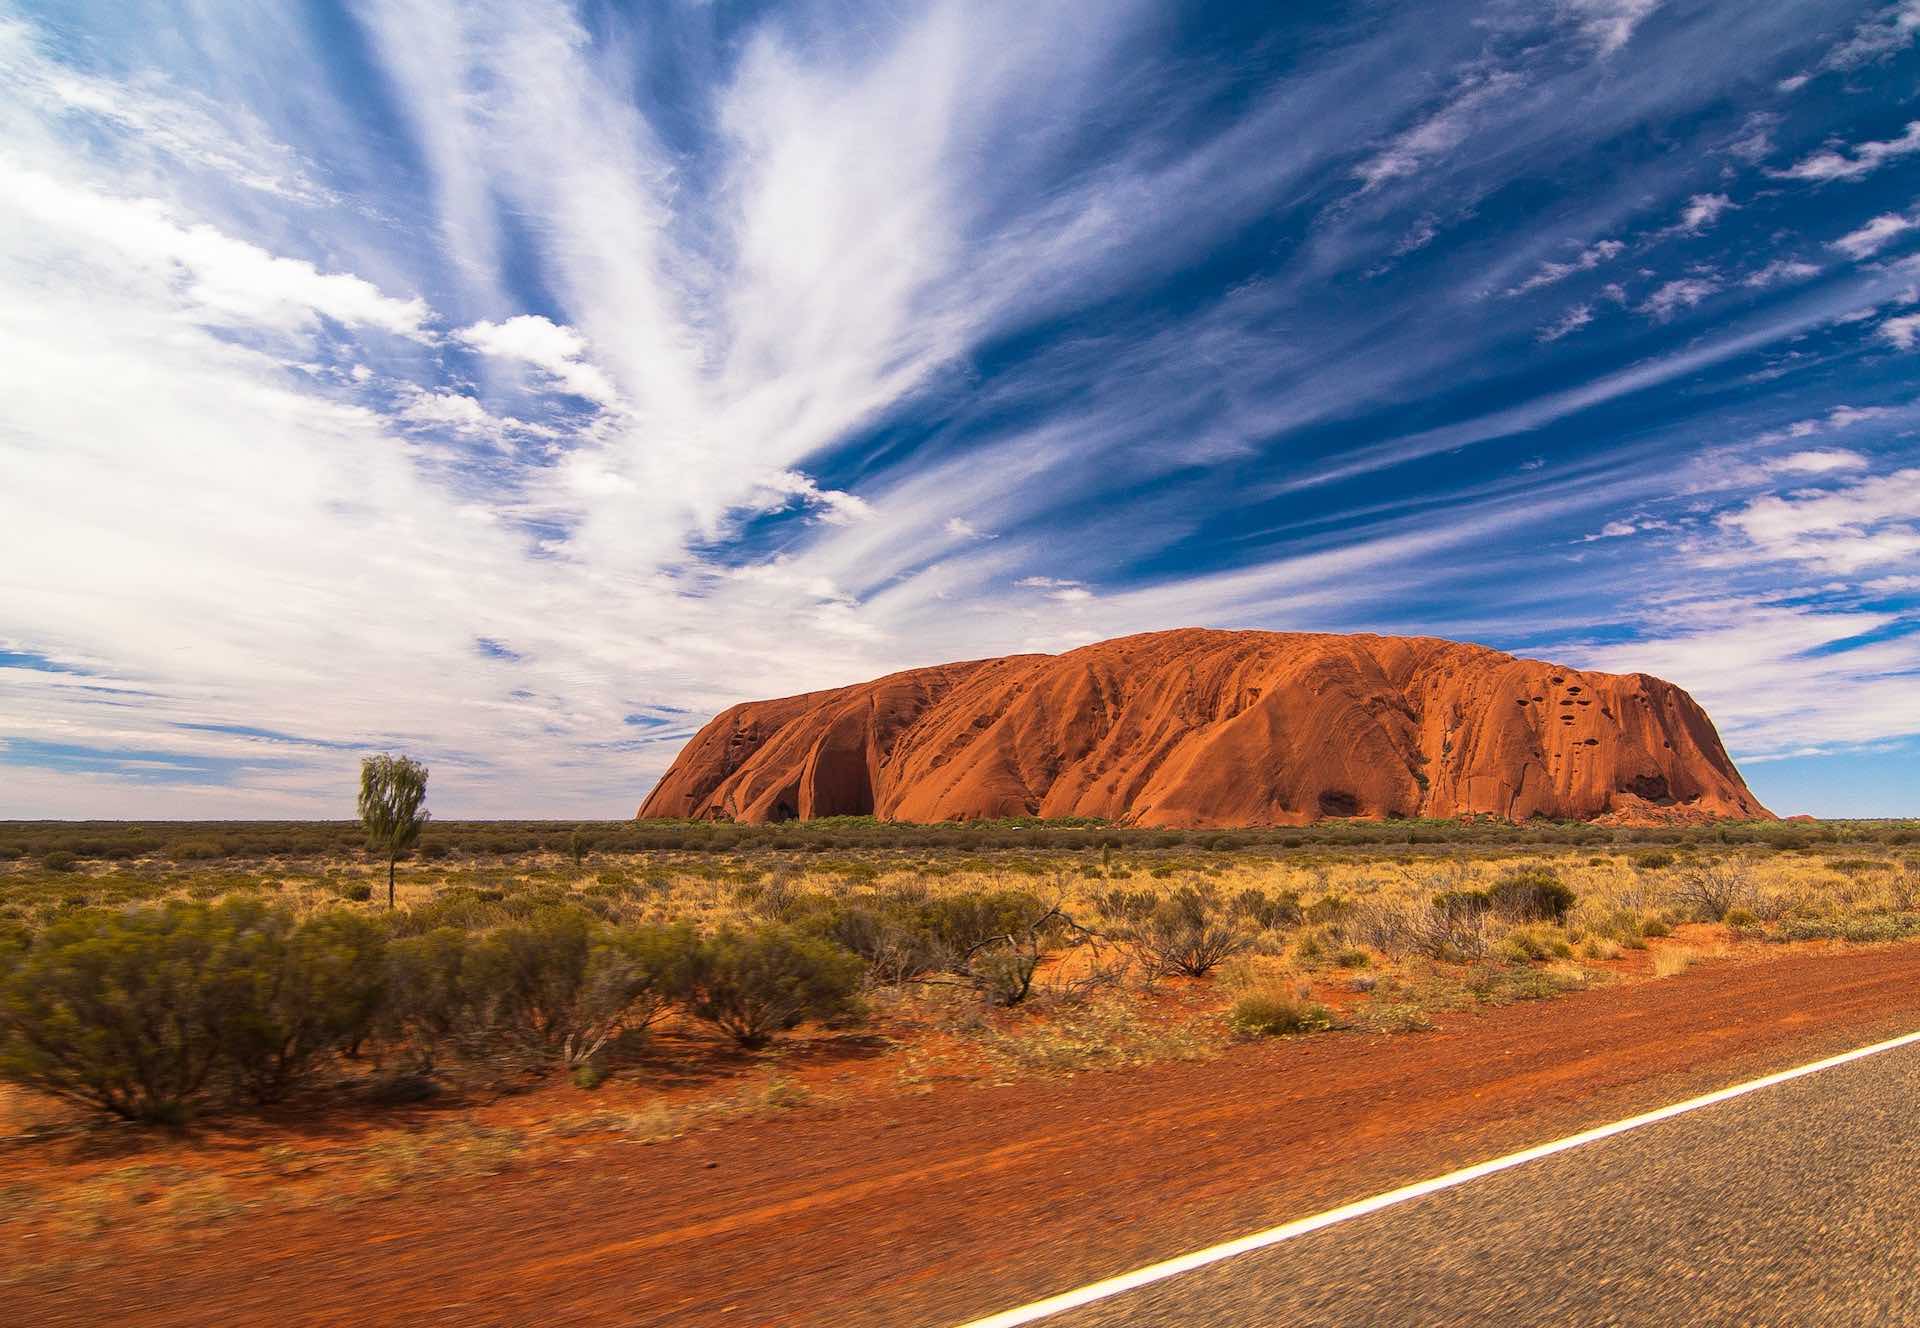 Ayers Rock against cloudy sky, Australian outback 